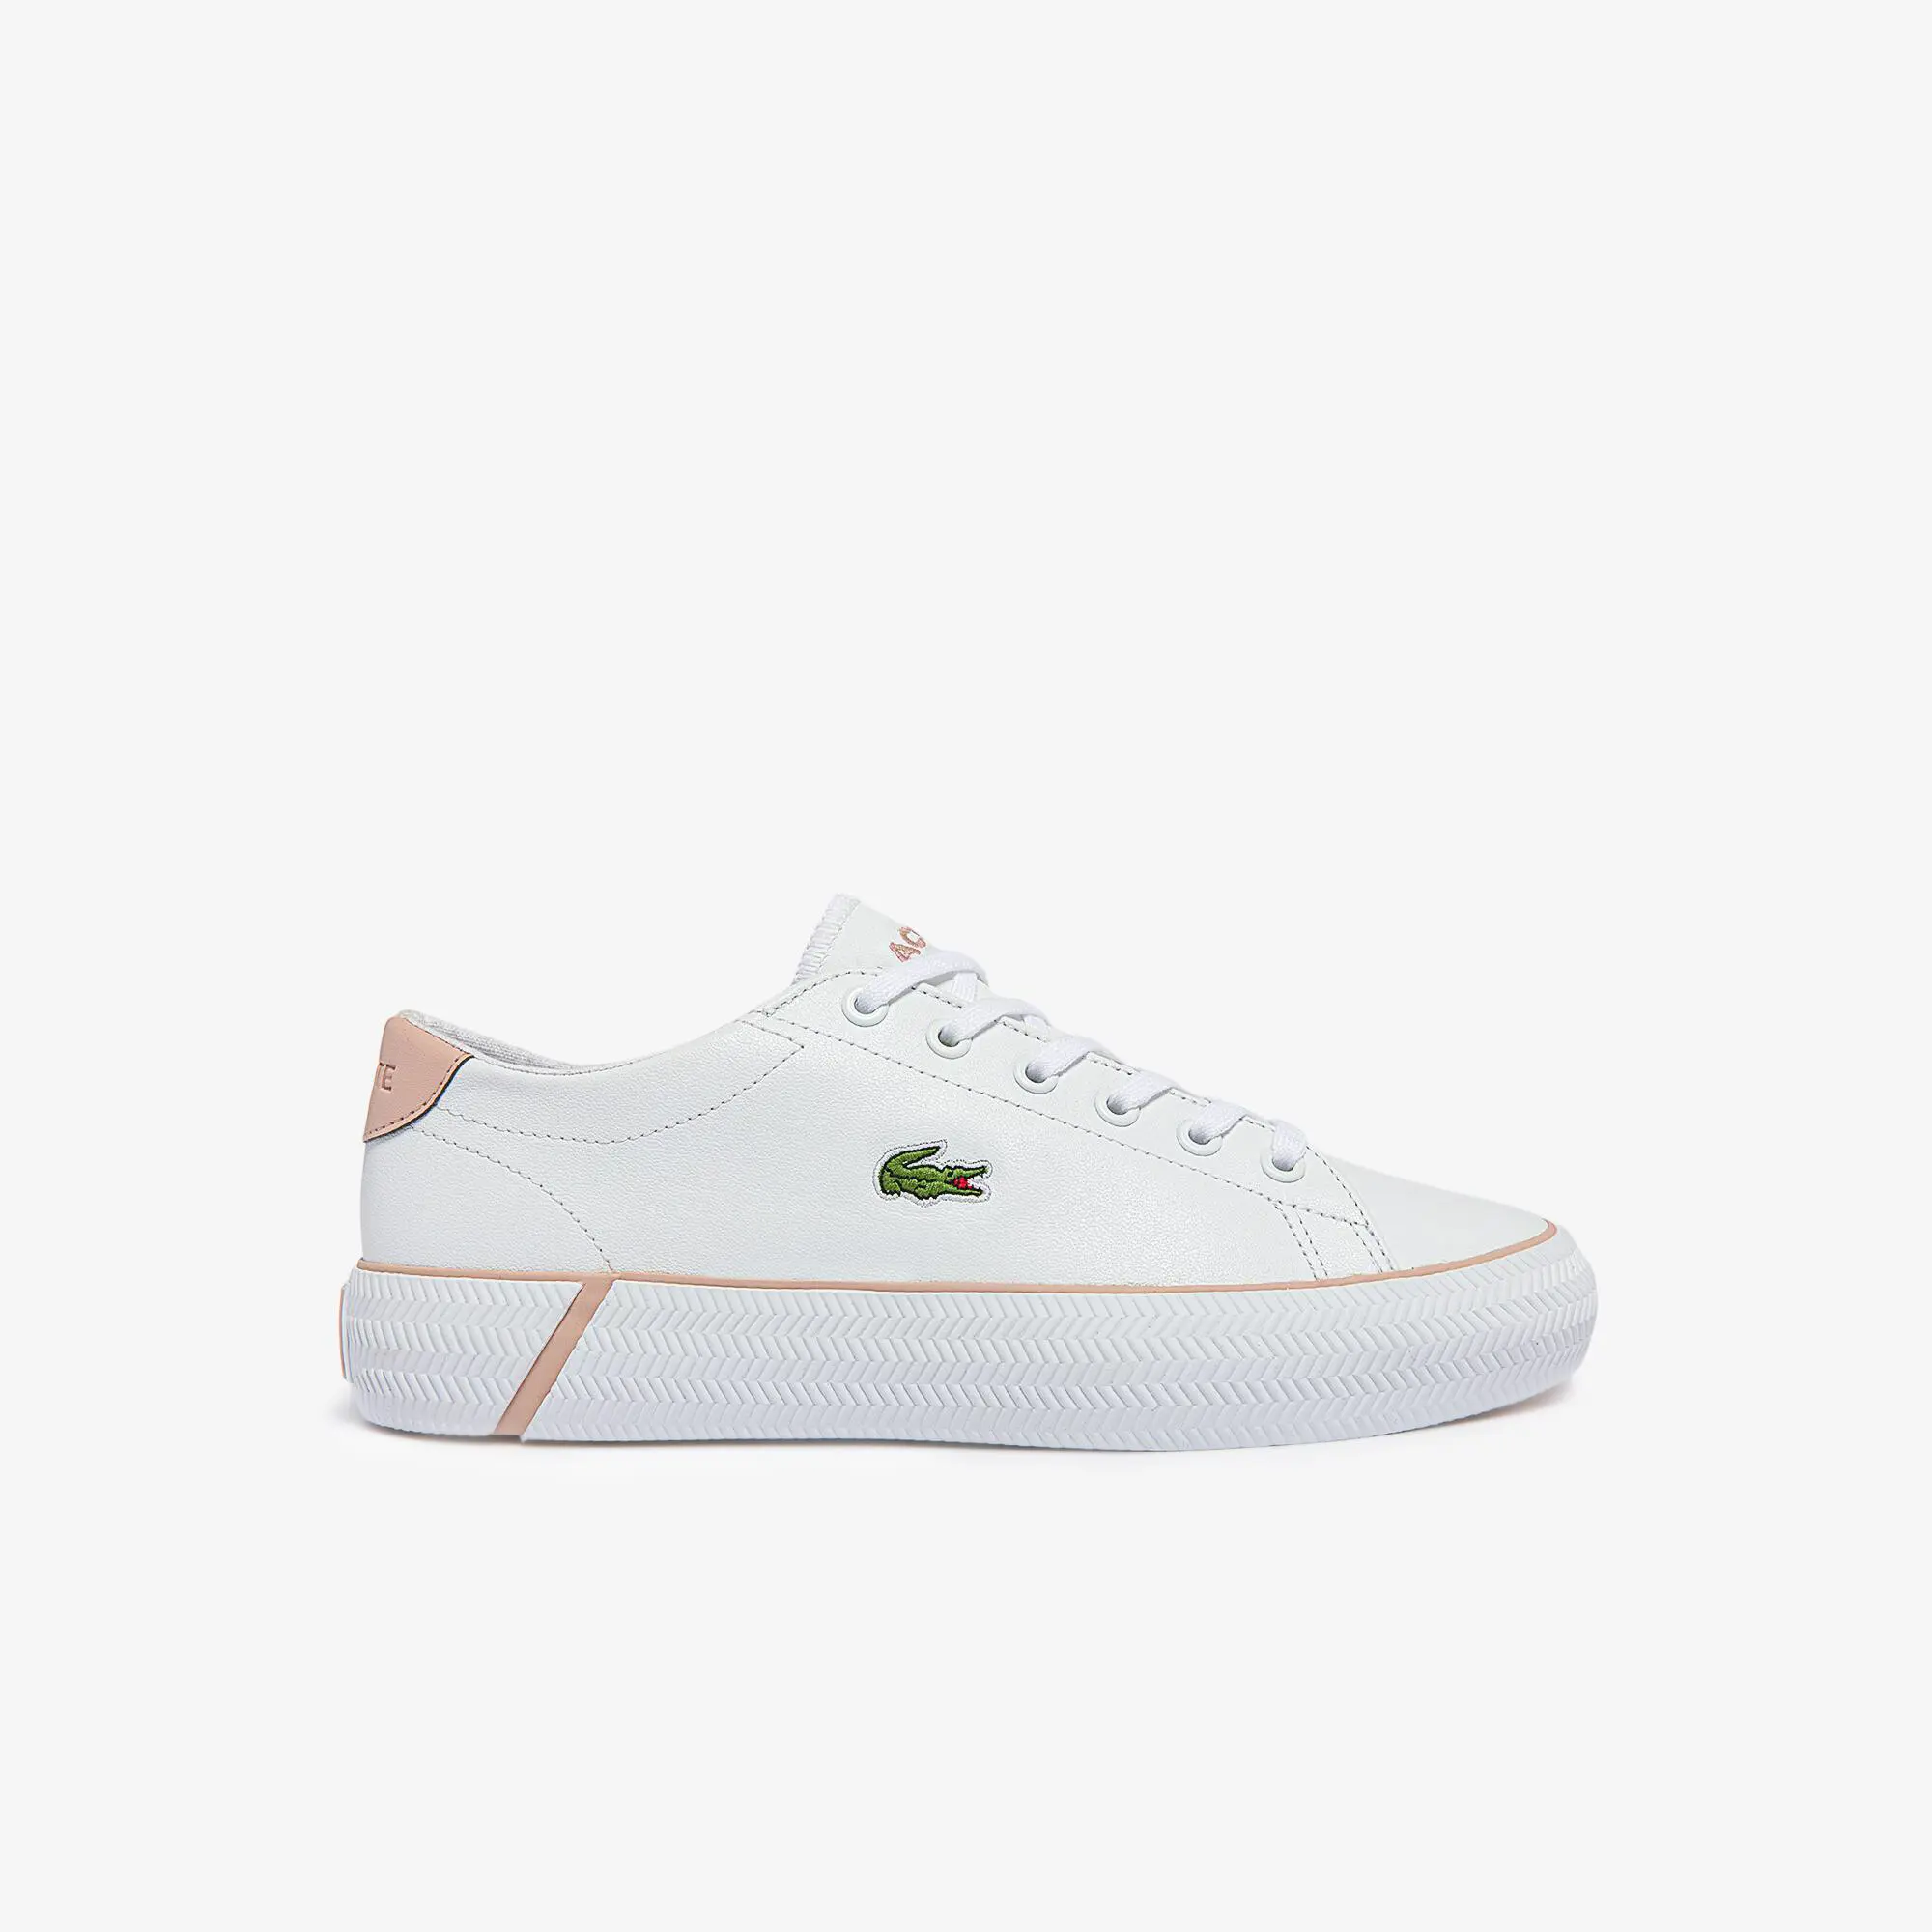 Lacoste Women's Gripshot BL Leather Sneakers. 1